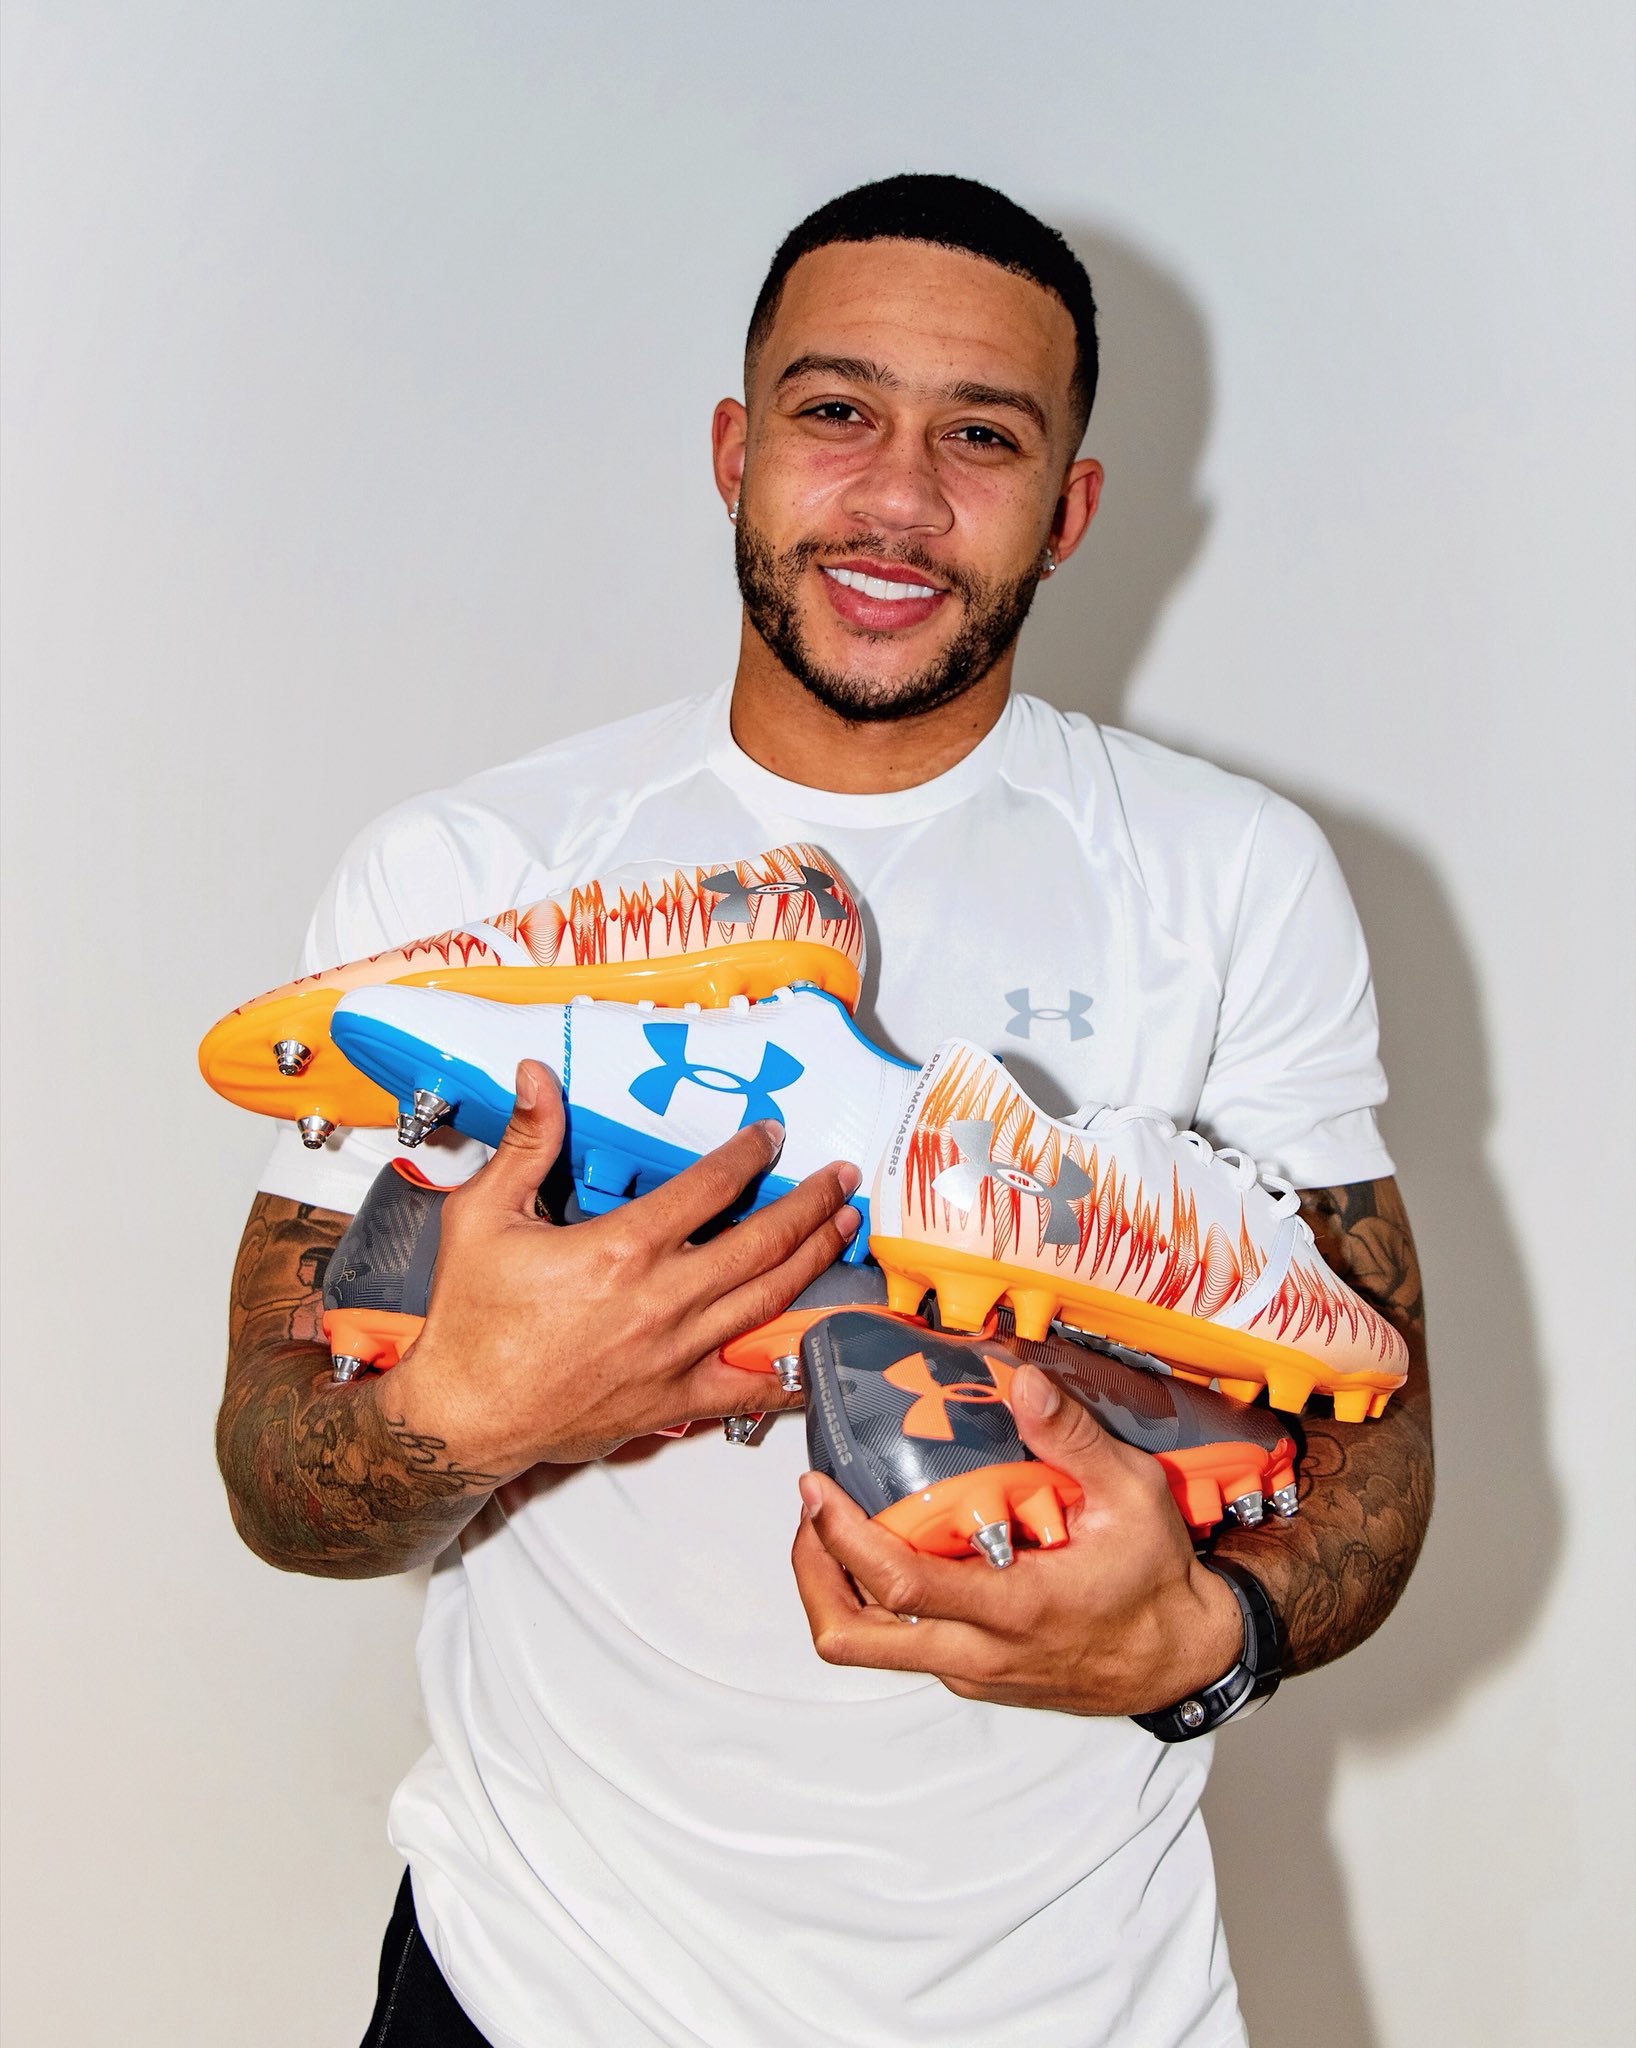 Memphis Depay on X: I'm giving away 5 signed Holland shirts! All you have  to do is follow me on Instagram, like the post and tag in 5 friends! Good  luck and